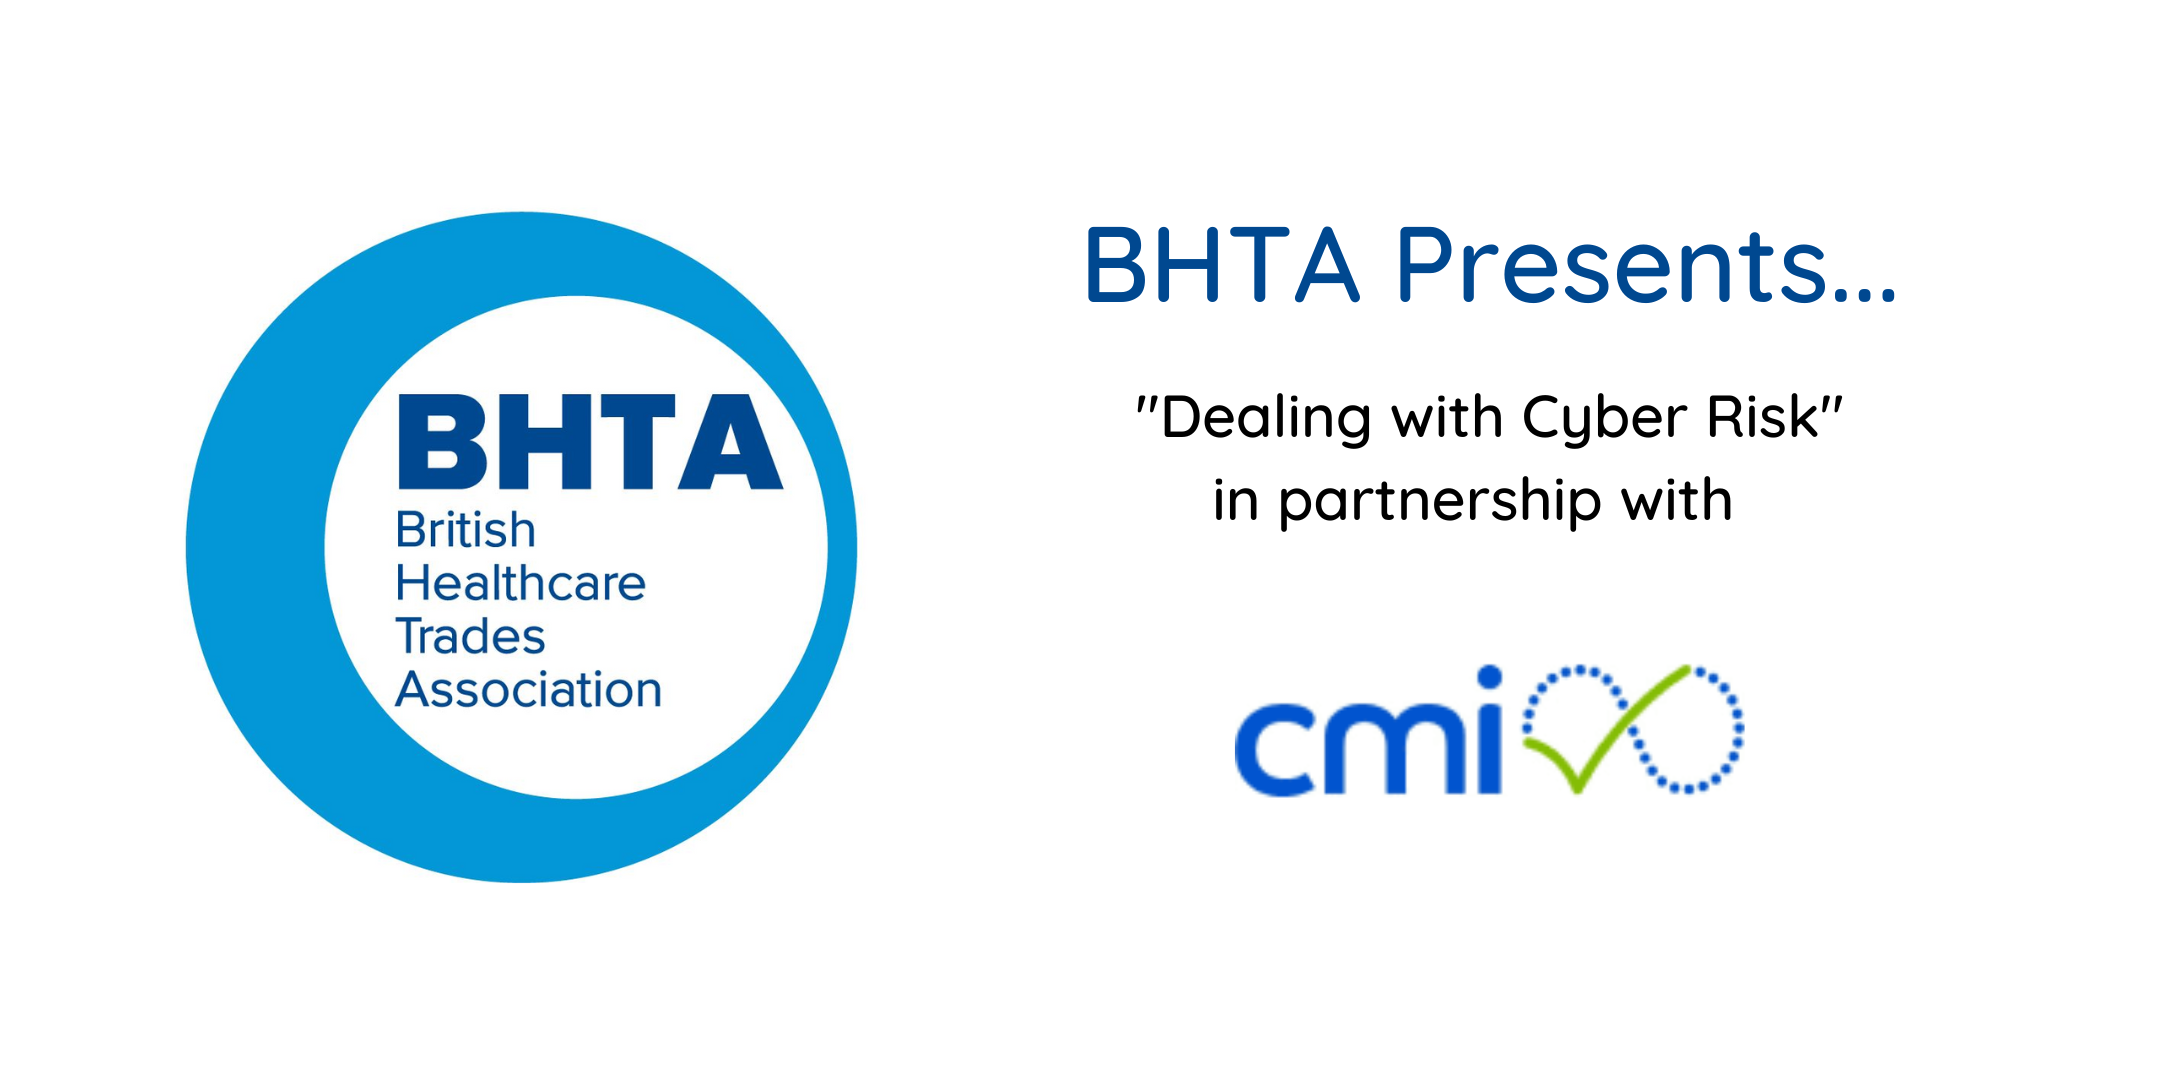 BHTA presents… “Dealing with Cyber Risk”